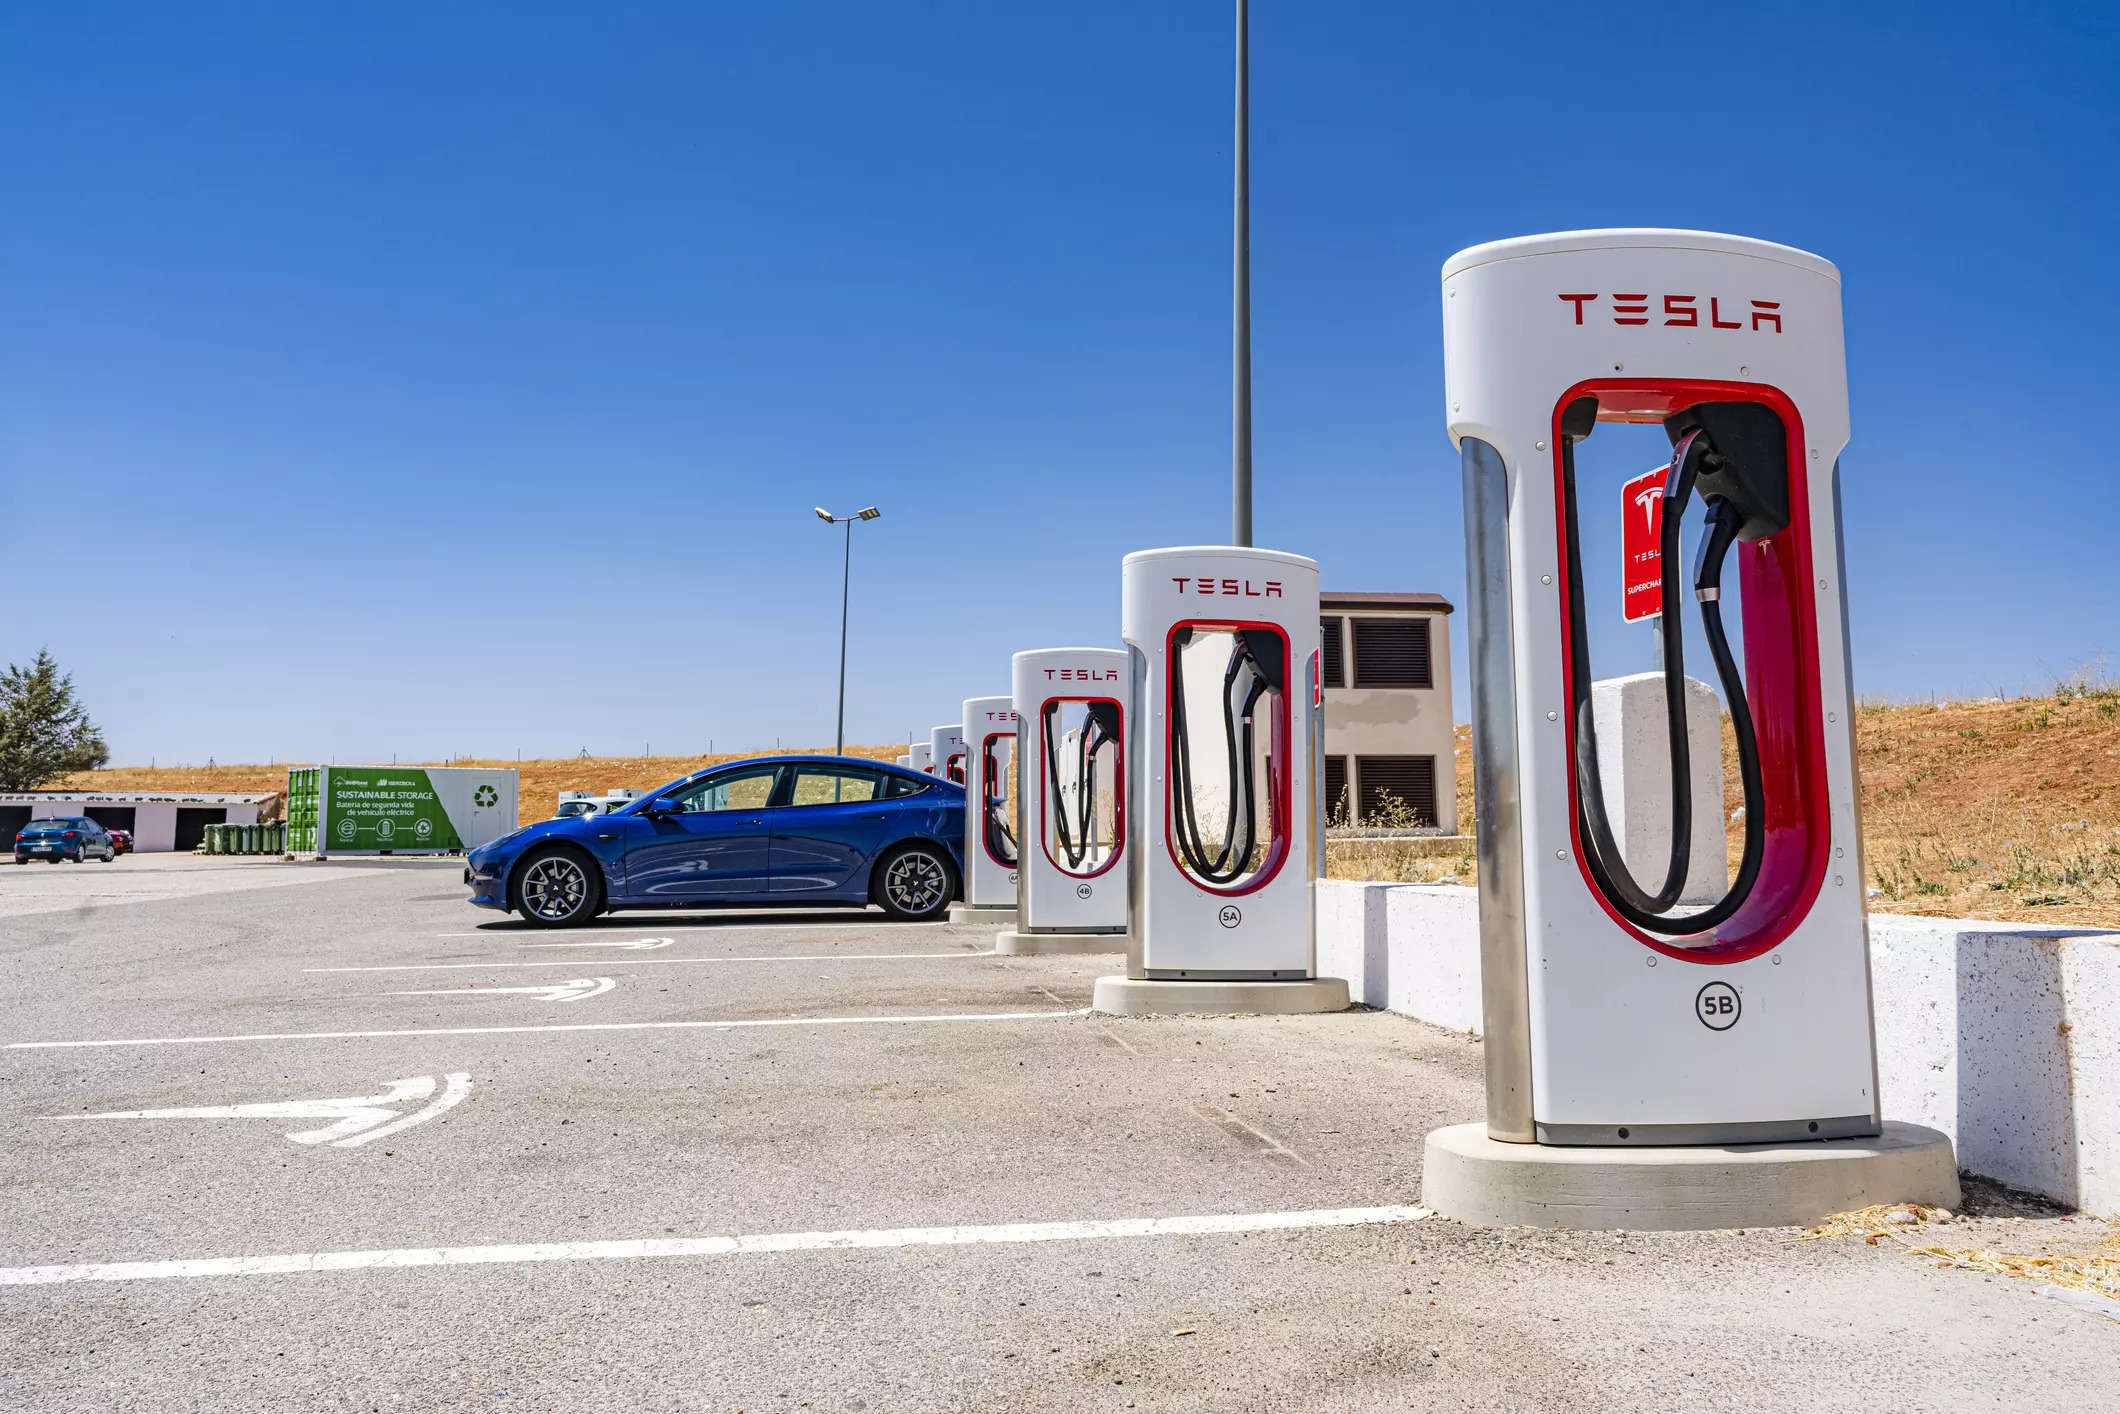 <p>Tesla has about 17,000 Supercharger stations in the U.S. There are about 54,000 public charging stations in the U.S., according to the Department of Energy, but many charge much more slowly than the Tesla stations.</p>